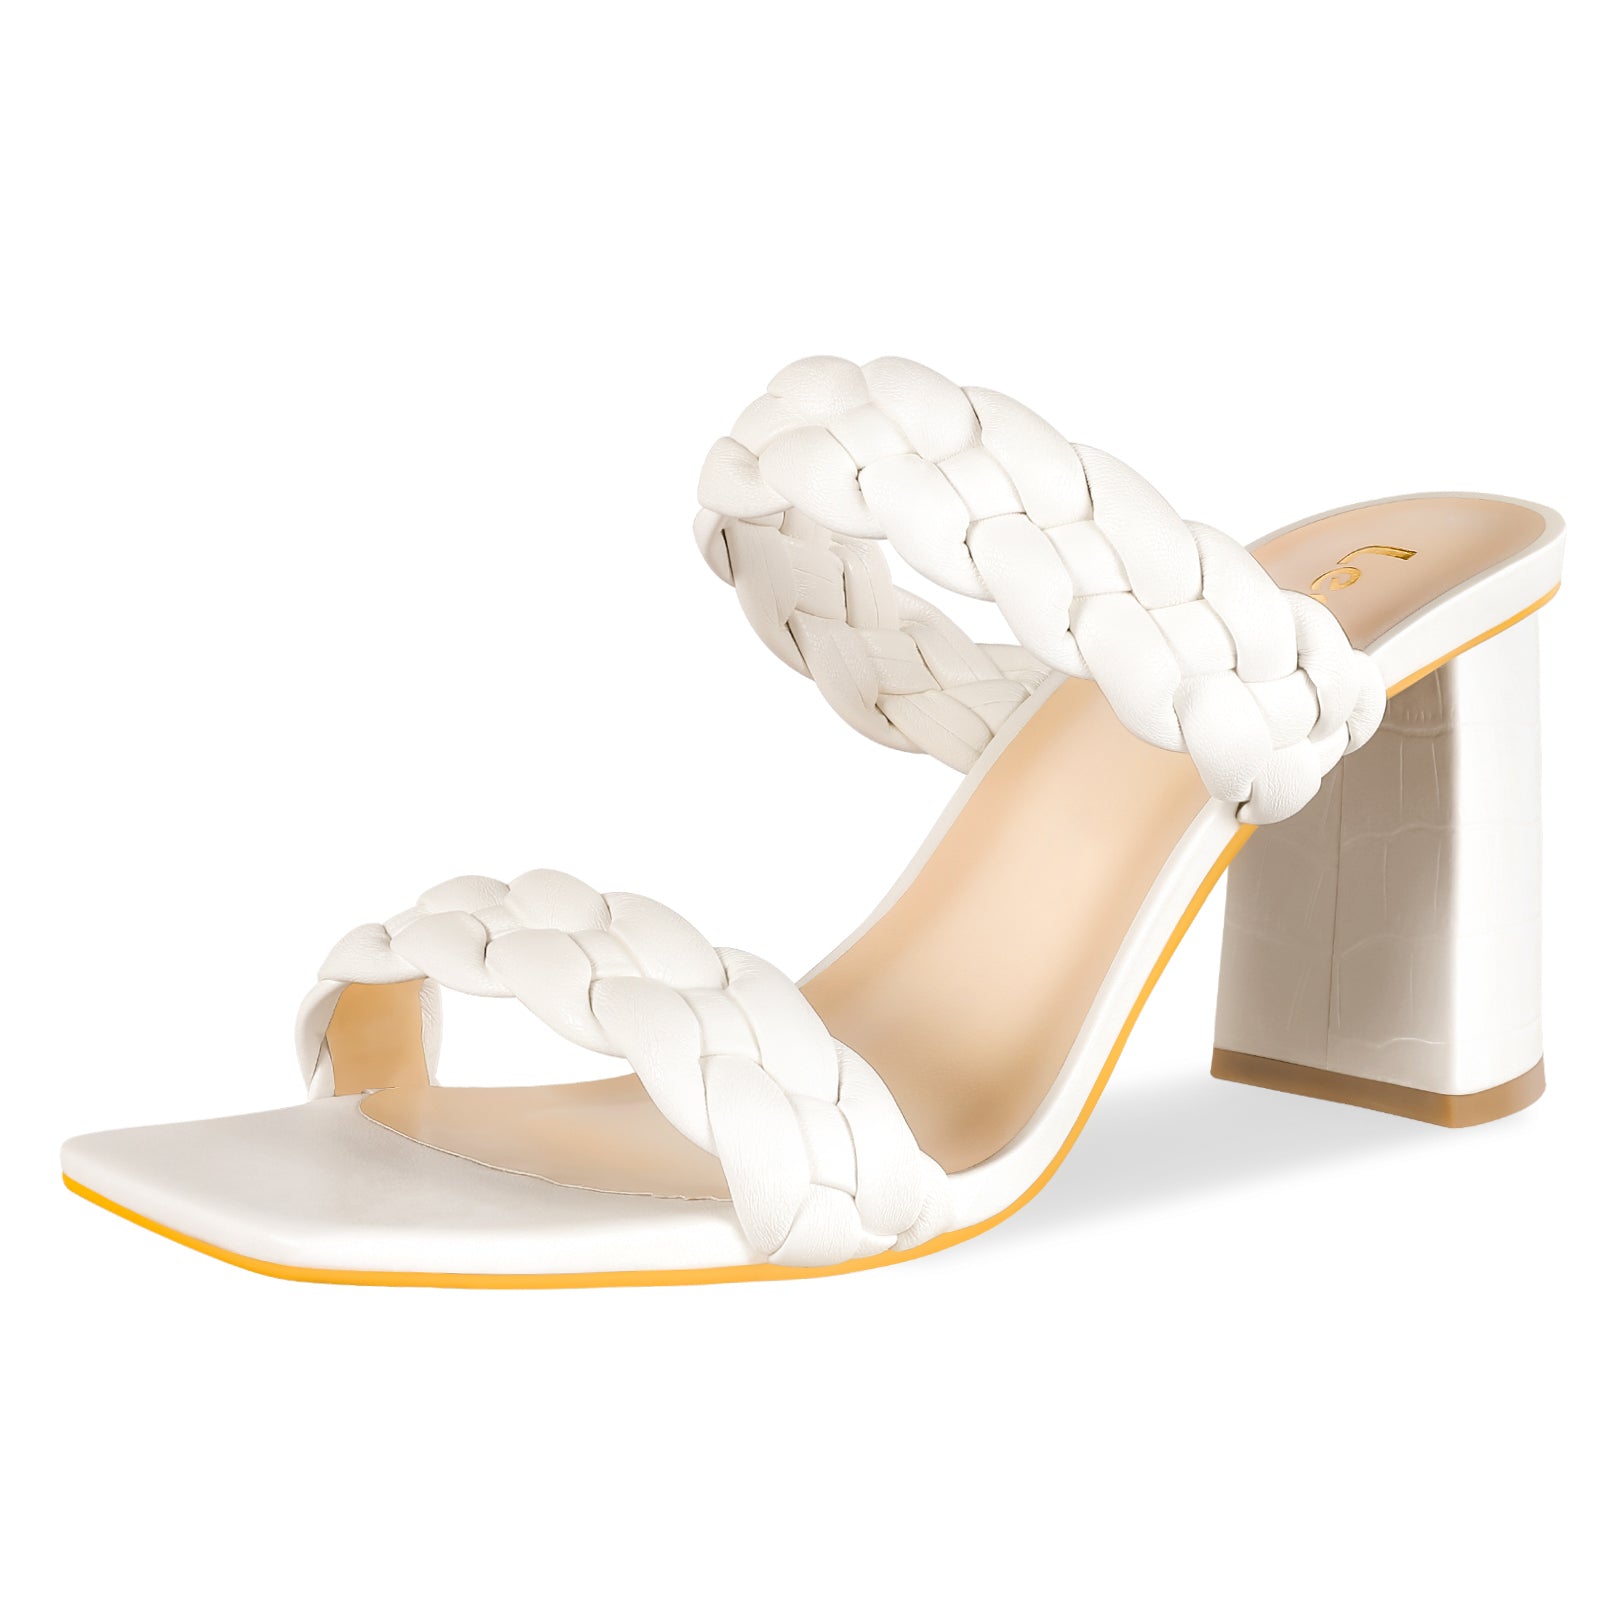 Leevar Braided Sandals for Women - 3 inches Woven Chunky Heels White